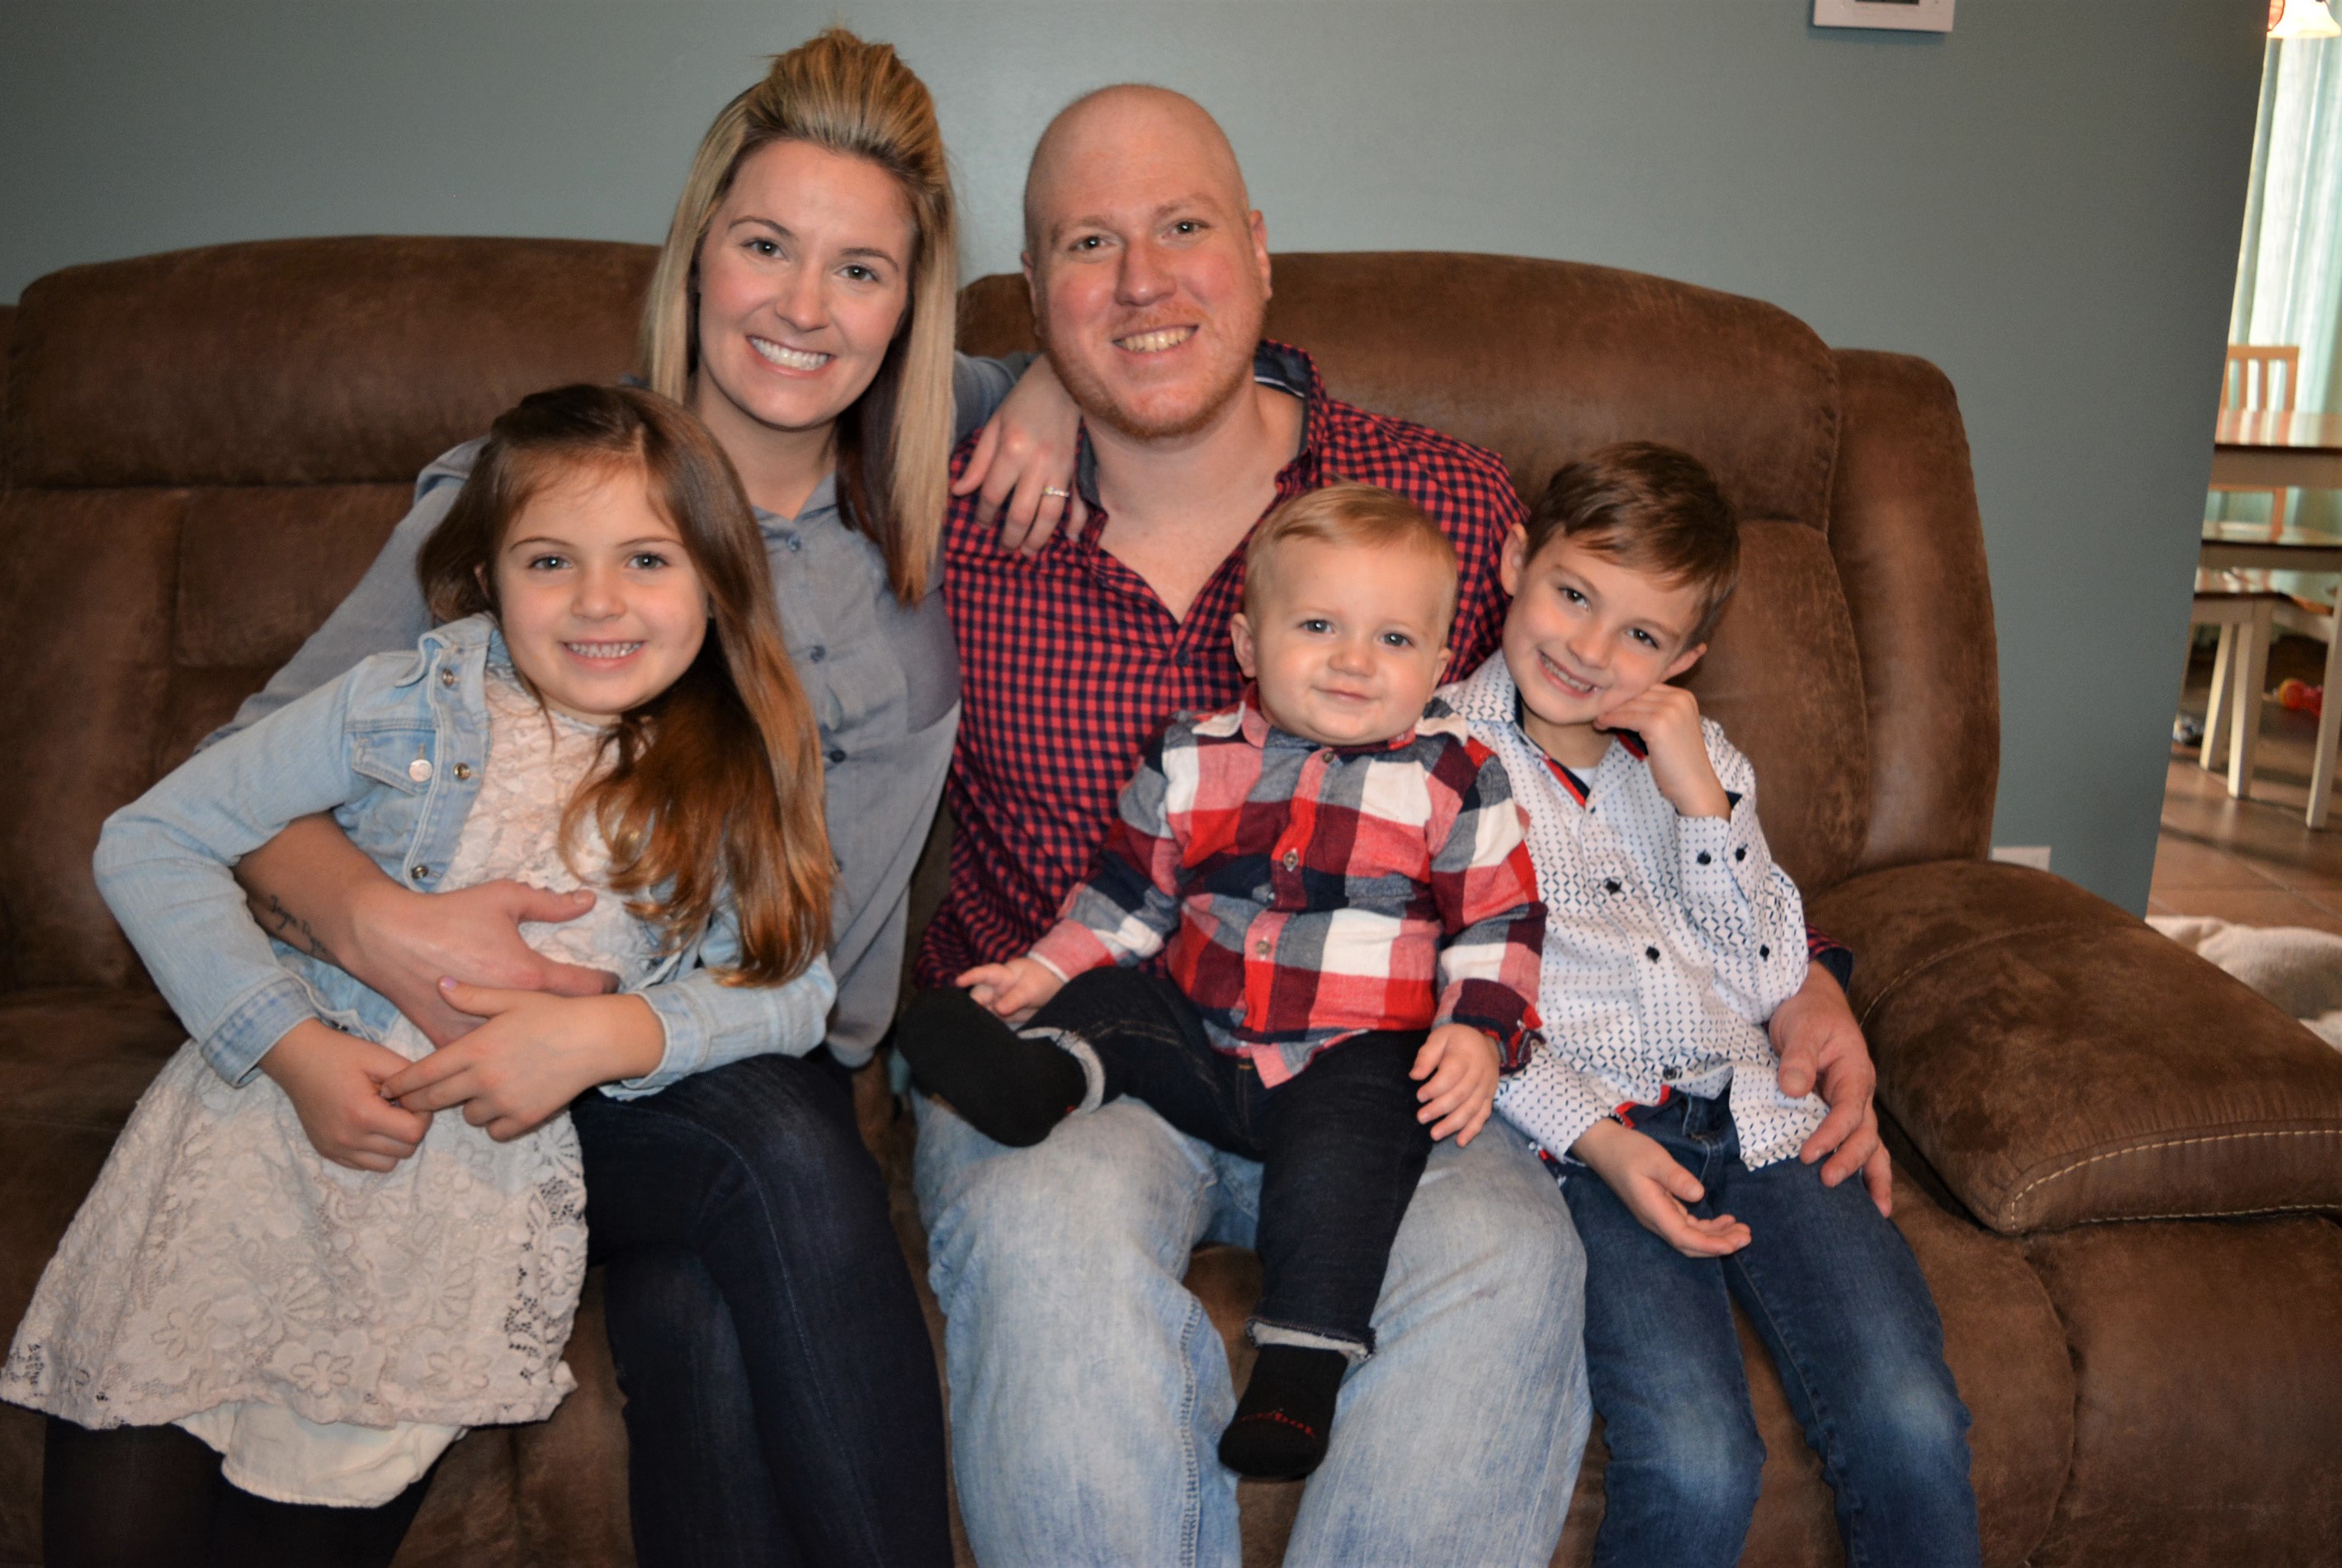 Oxford Village resident Eddie Kenny, his fiancee Breanna Bebernick and their children (from left) Ashtyn, E.J. and Jayce are facing cancer together. Photo by C.J. Carnacchio.